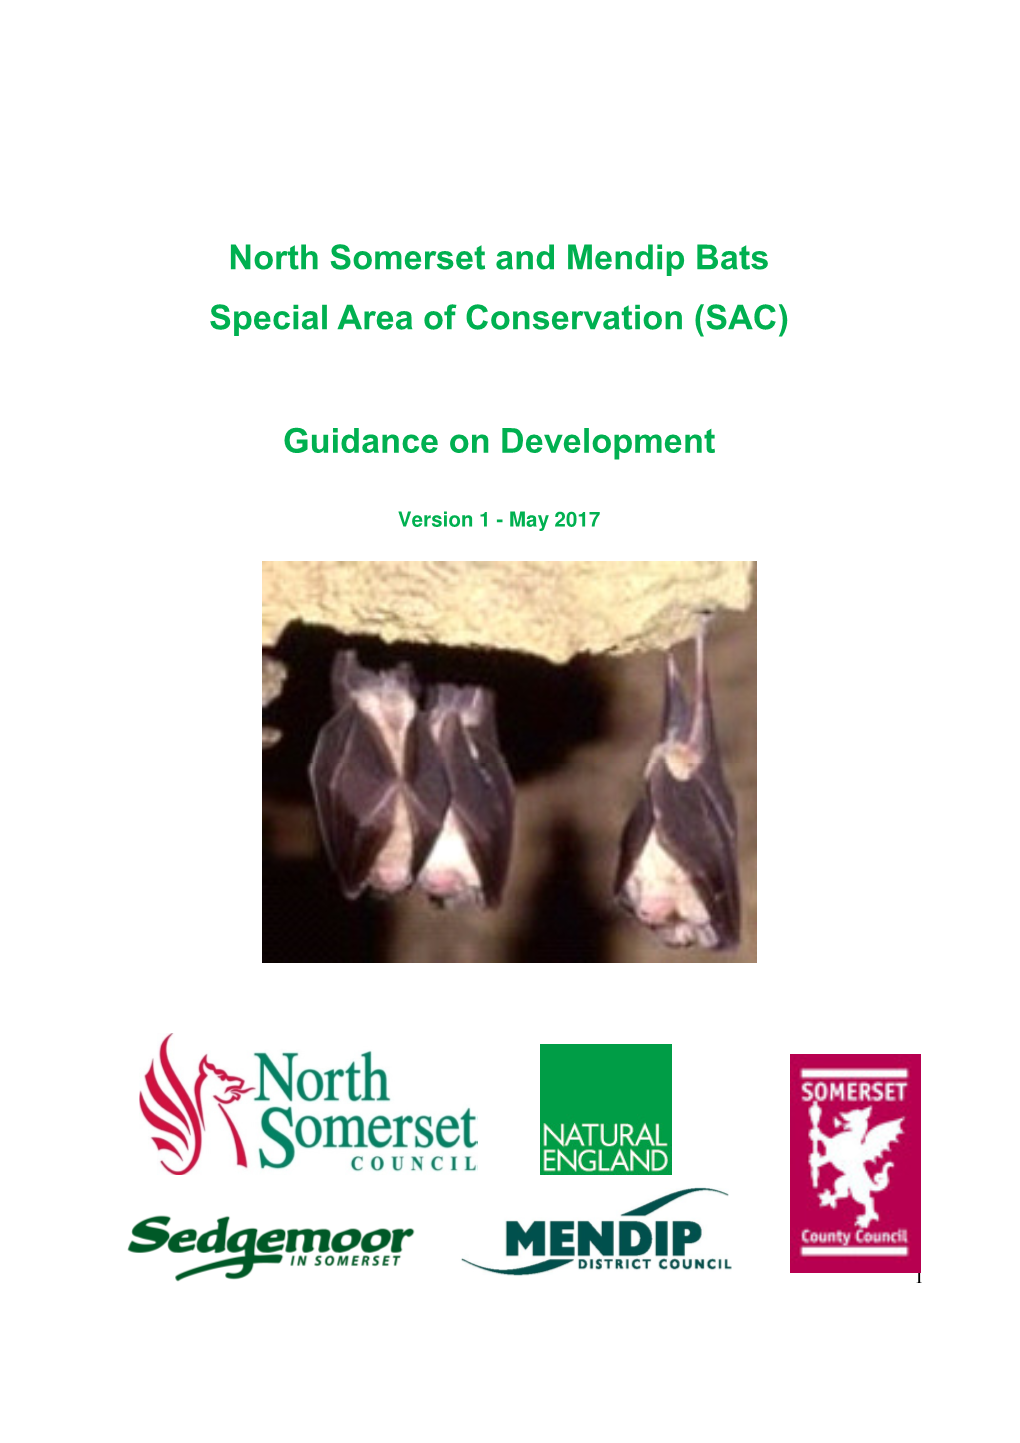 North Somerset and Mendip Bats Special Area of Conservation (SAC)